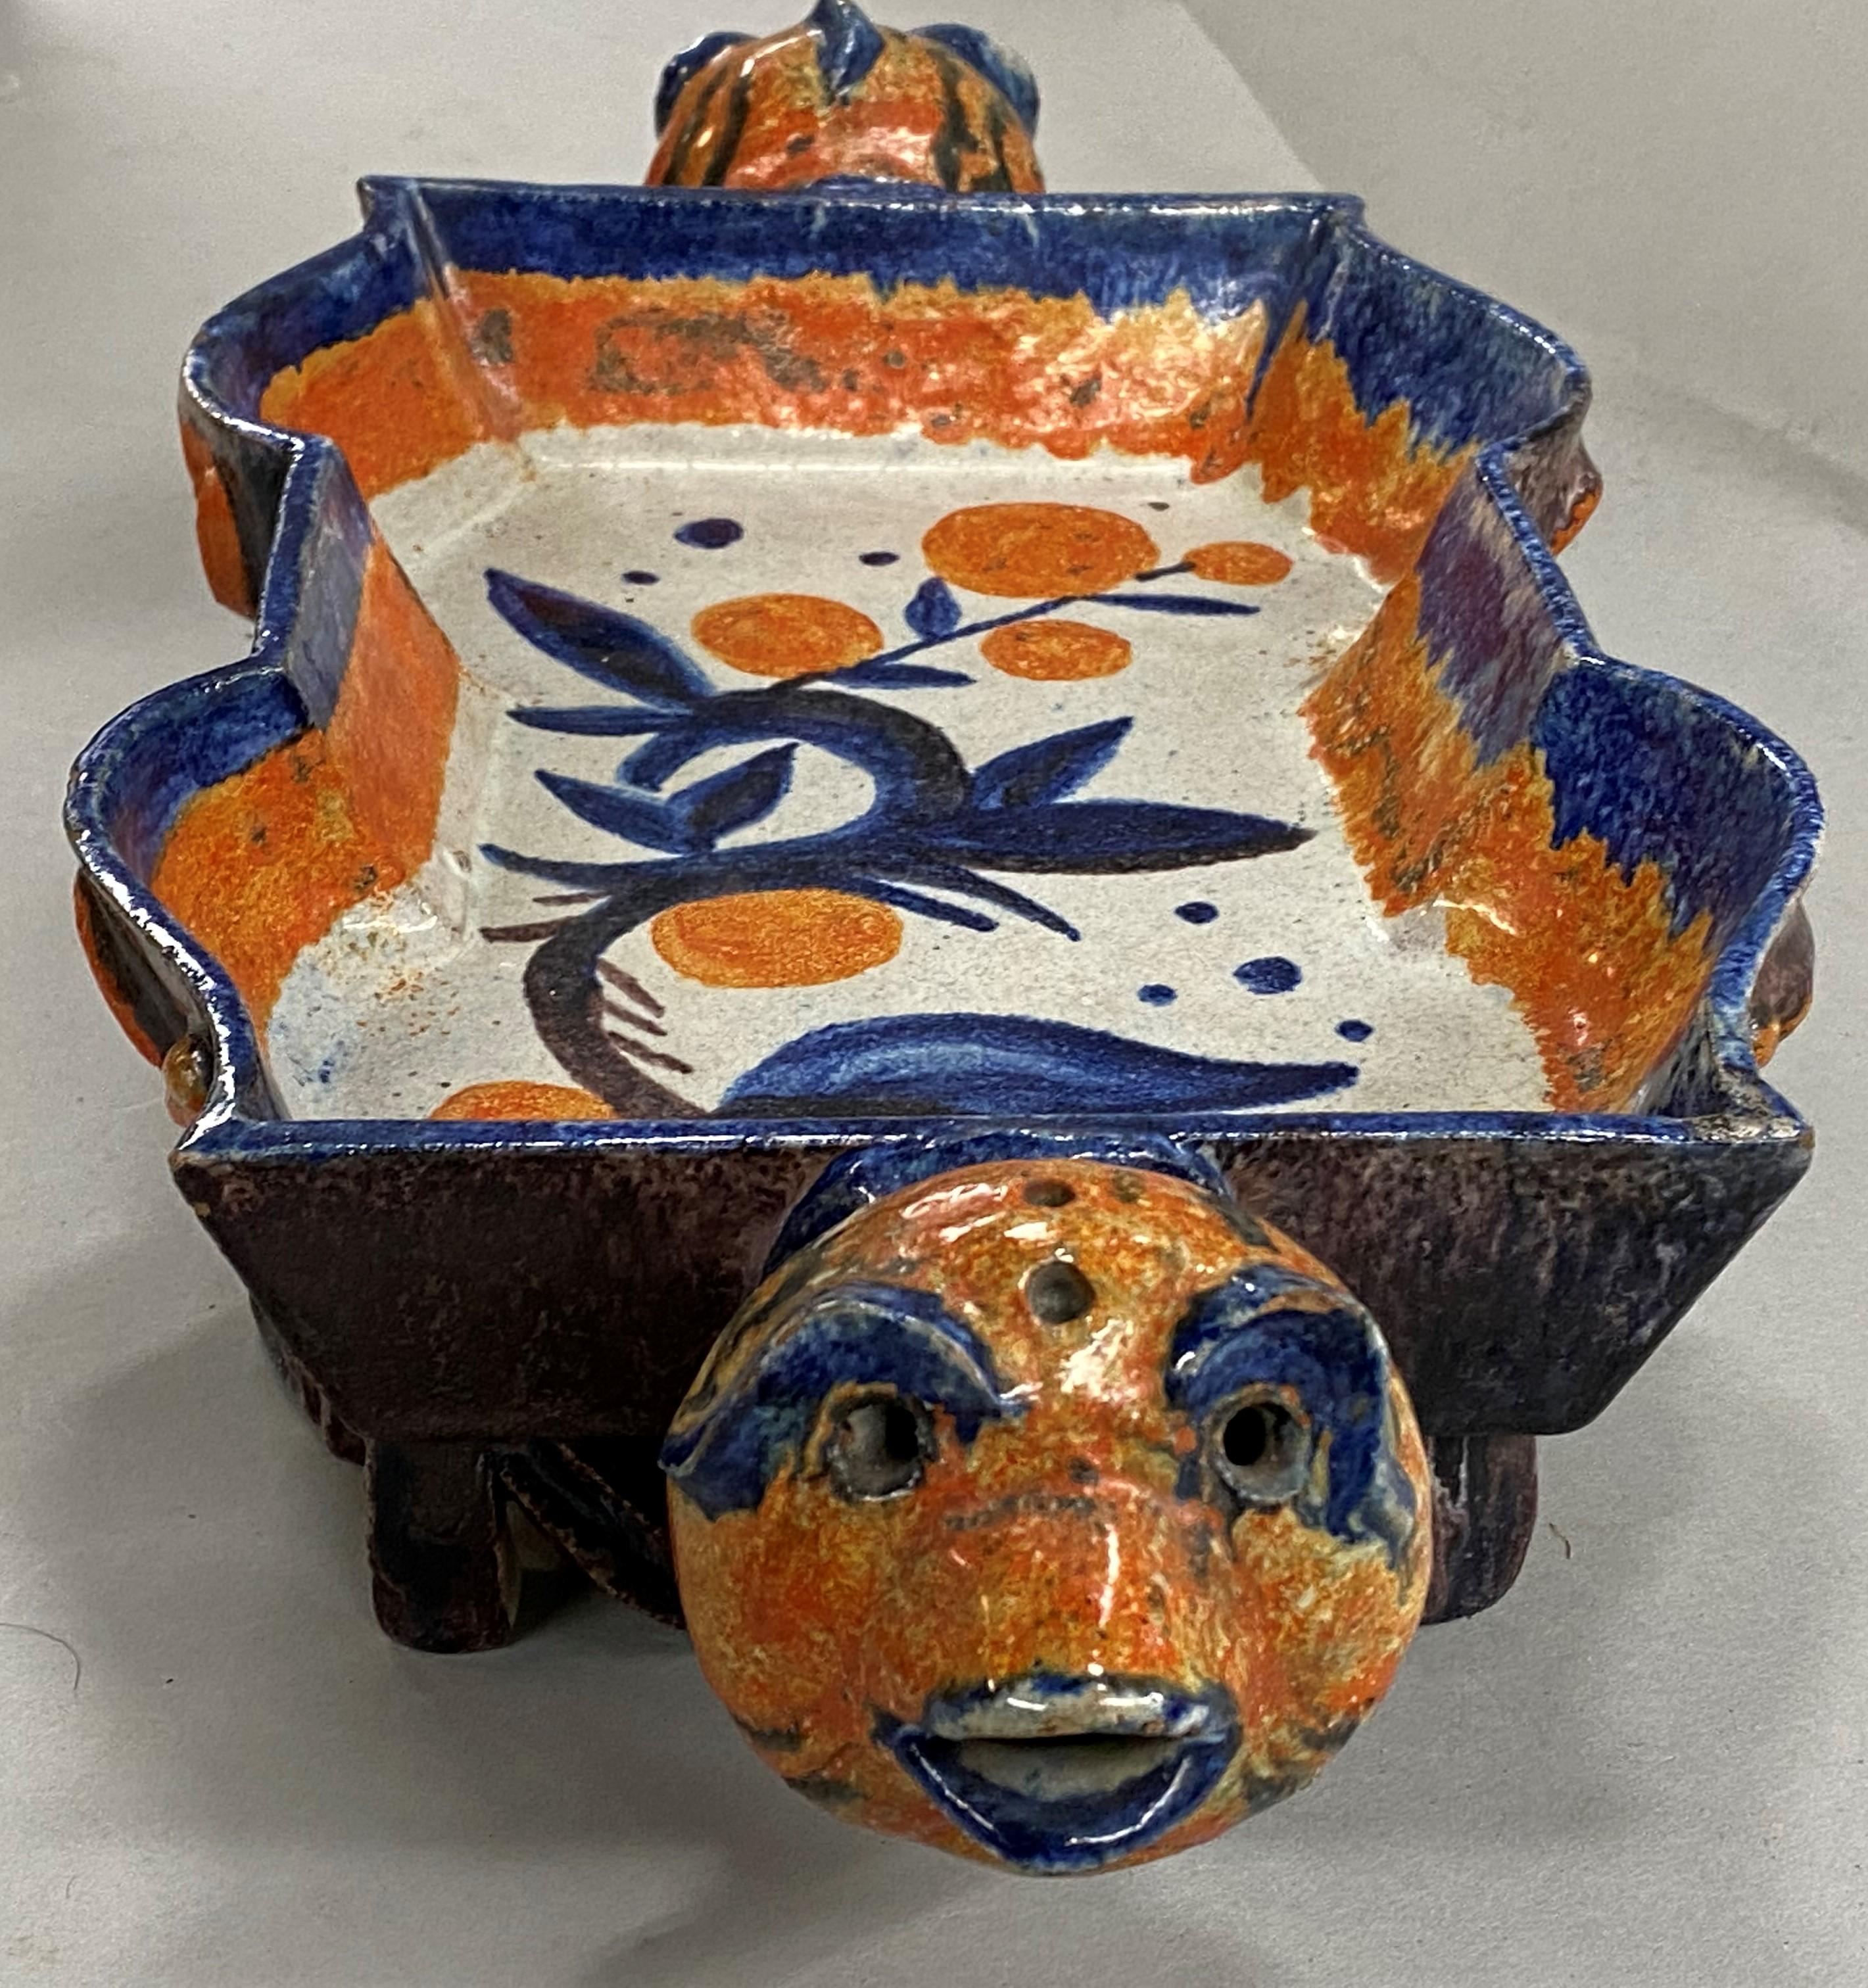 Polychrome Ceramic Centerpiece with Animal Head Handles - Vienna Secession Art by Vally Wieselthier